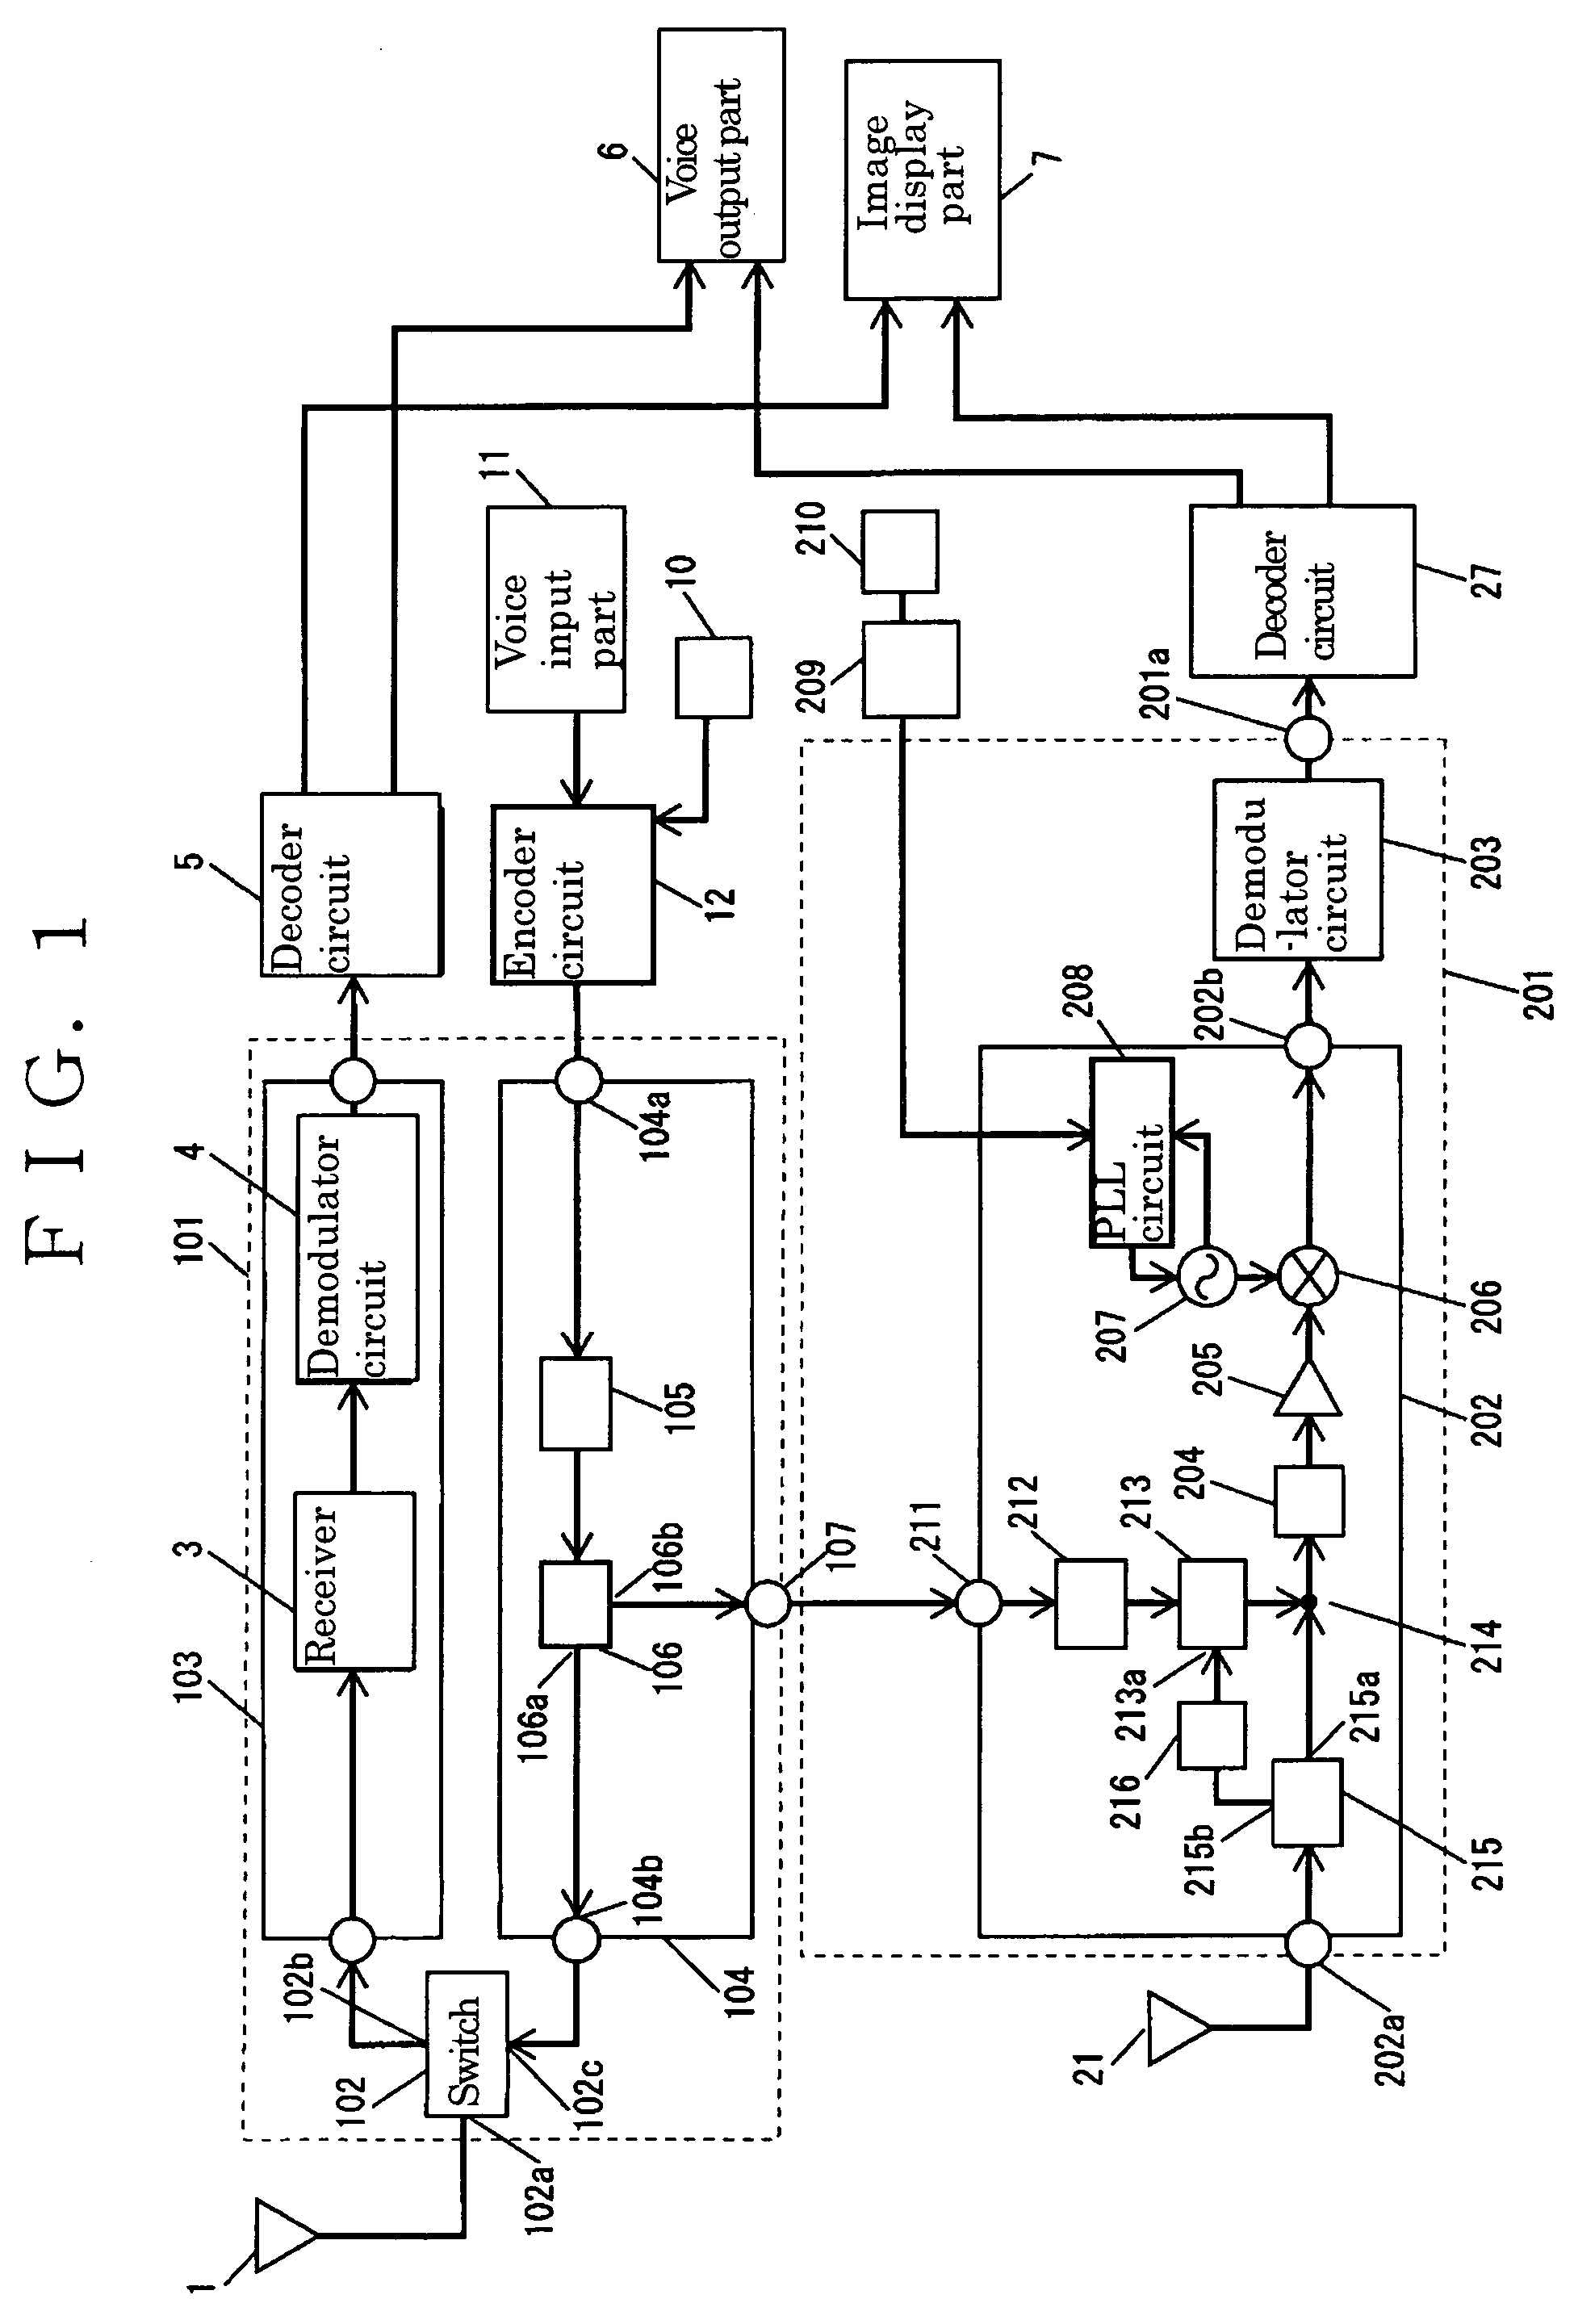 Apparatus and method for interference canceller in a high frequency receiver and transmitter